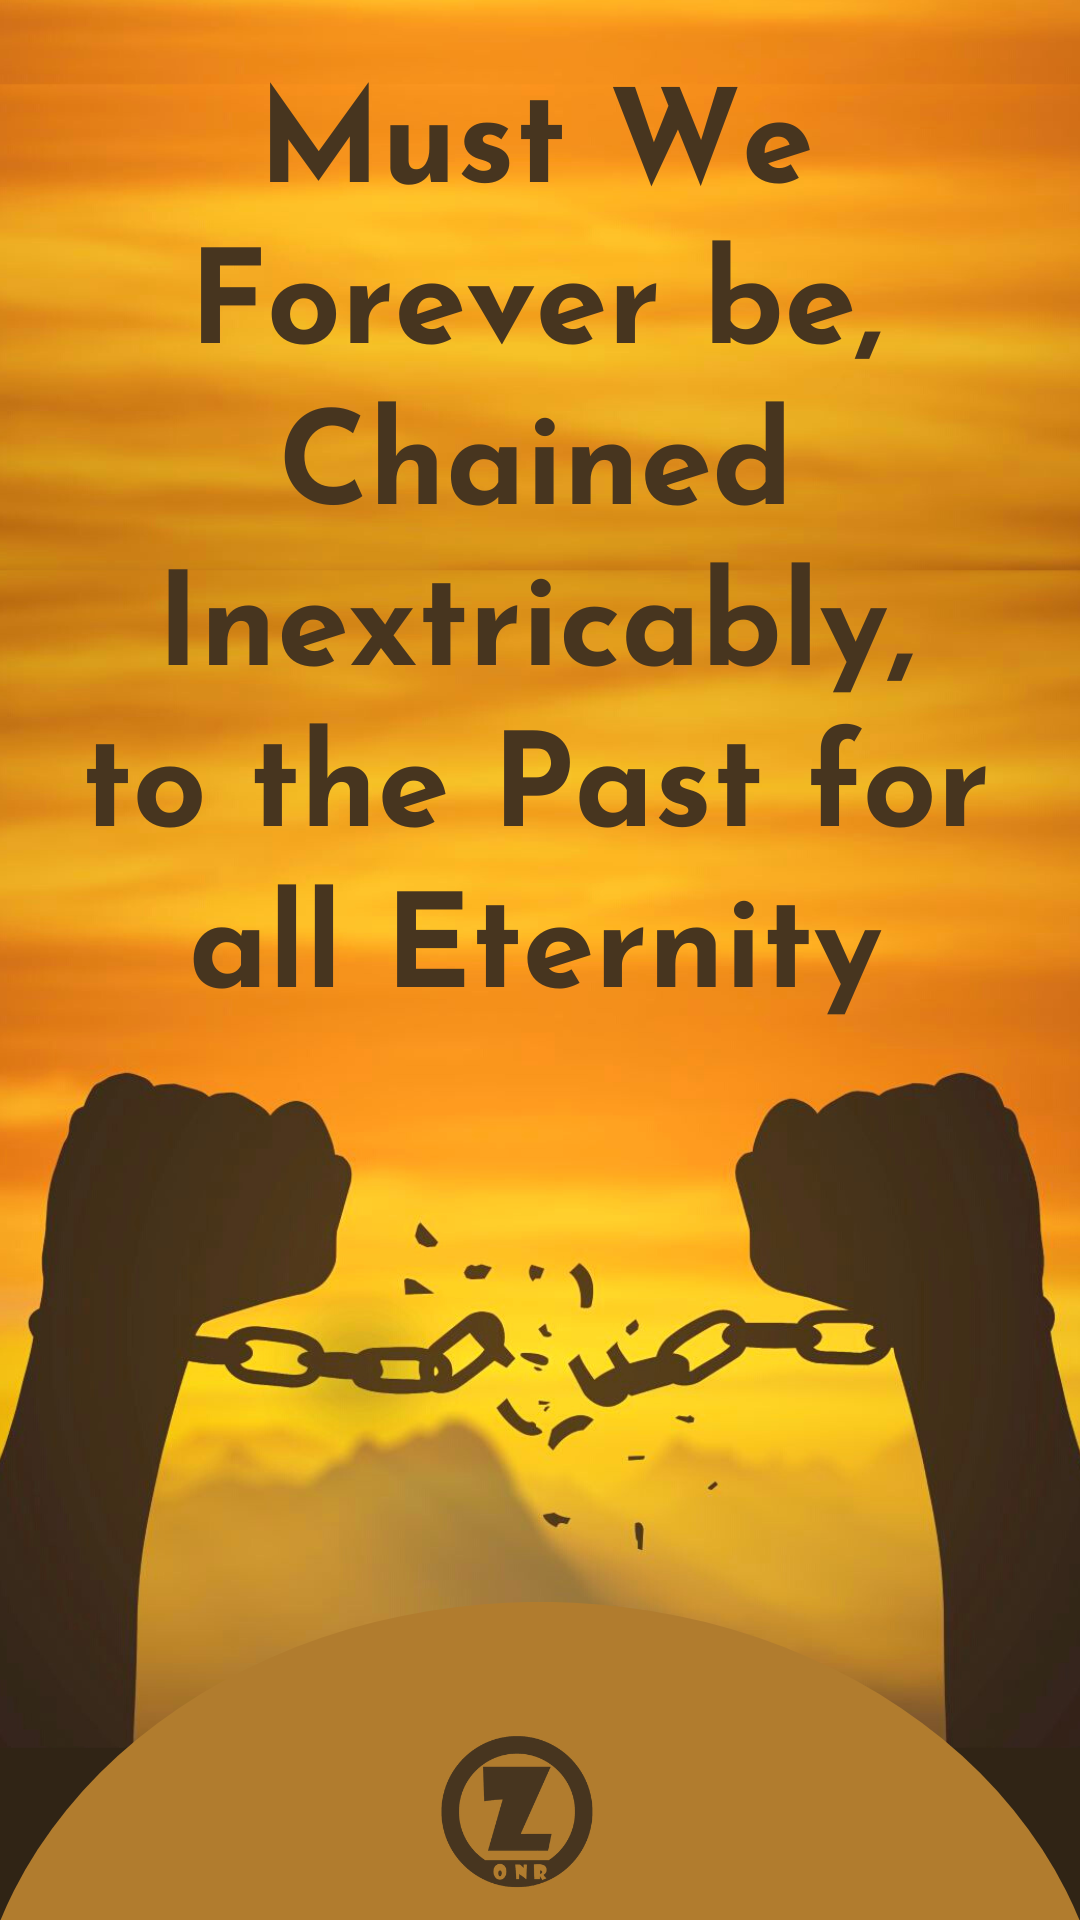 You are currently viewing Must We Forever be, Chained Inextricably, to the Past for all Eternity – Step 8 begins